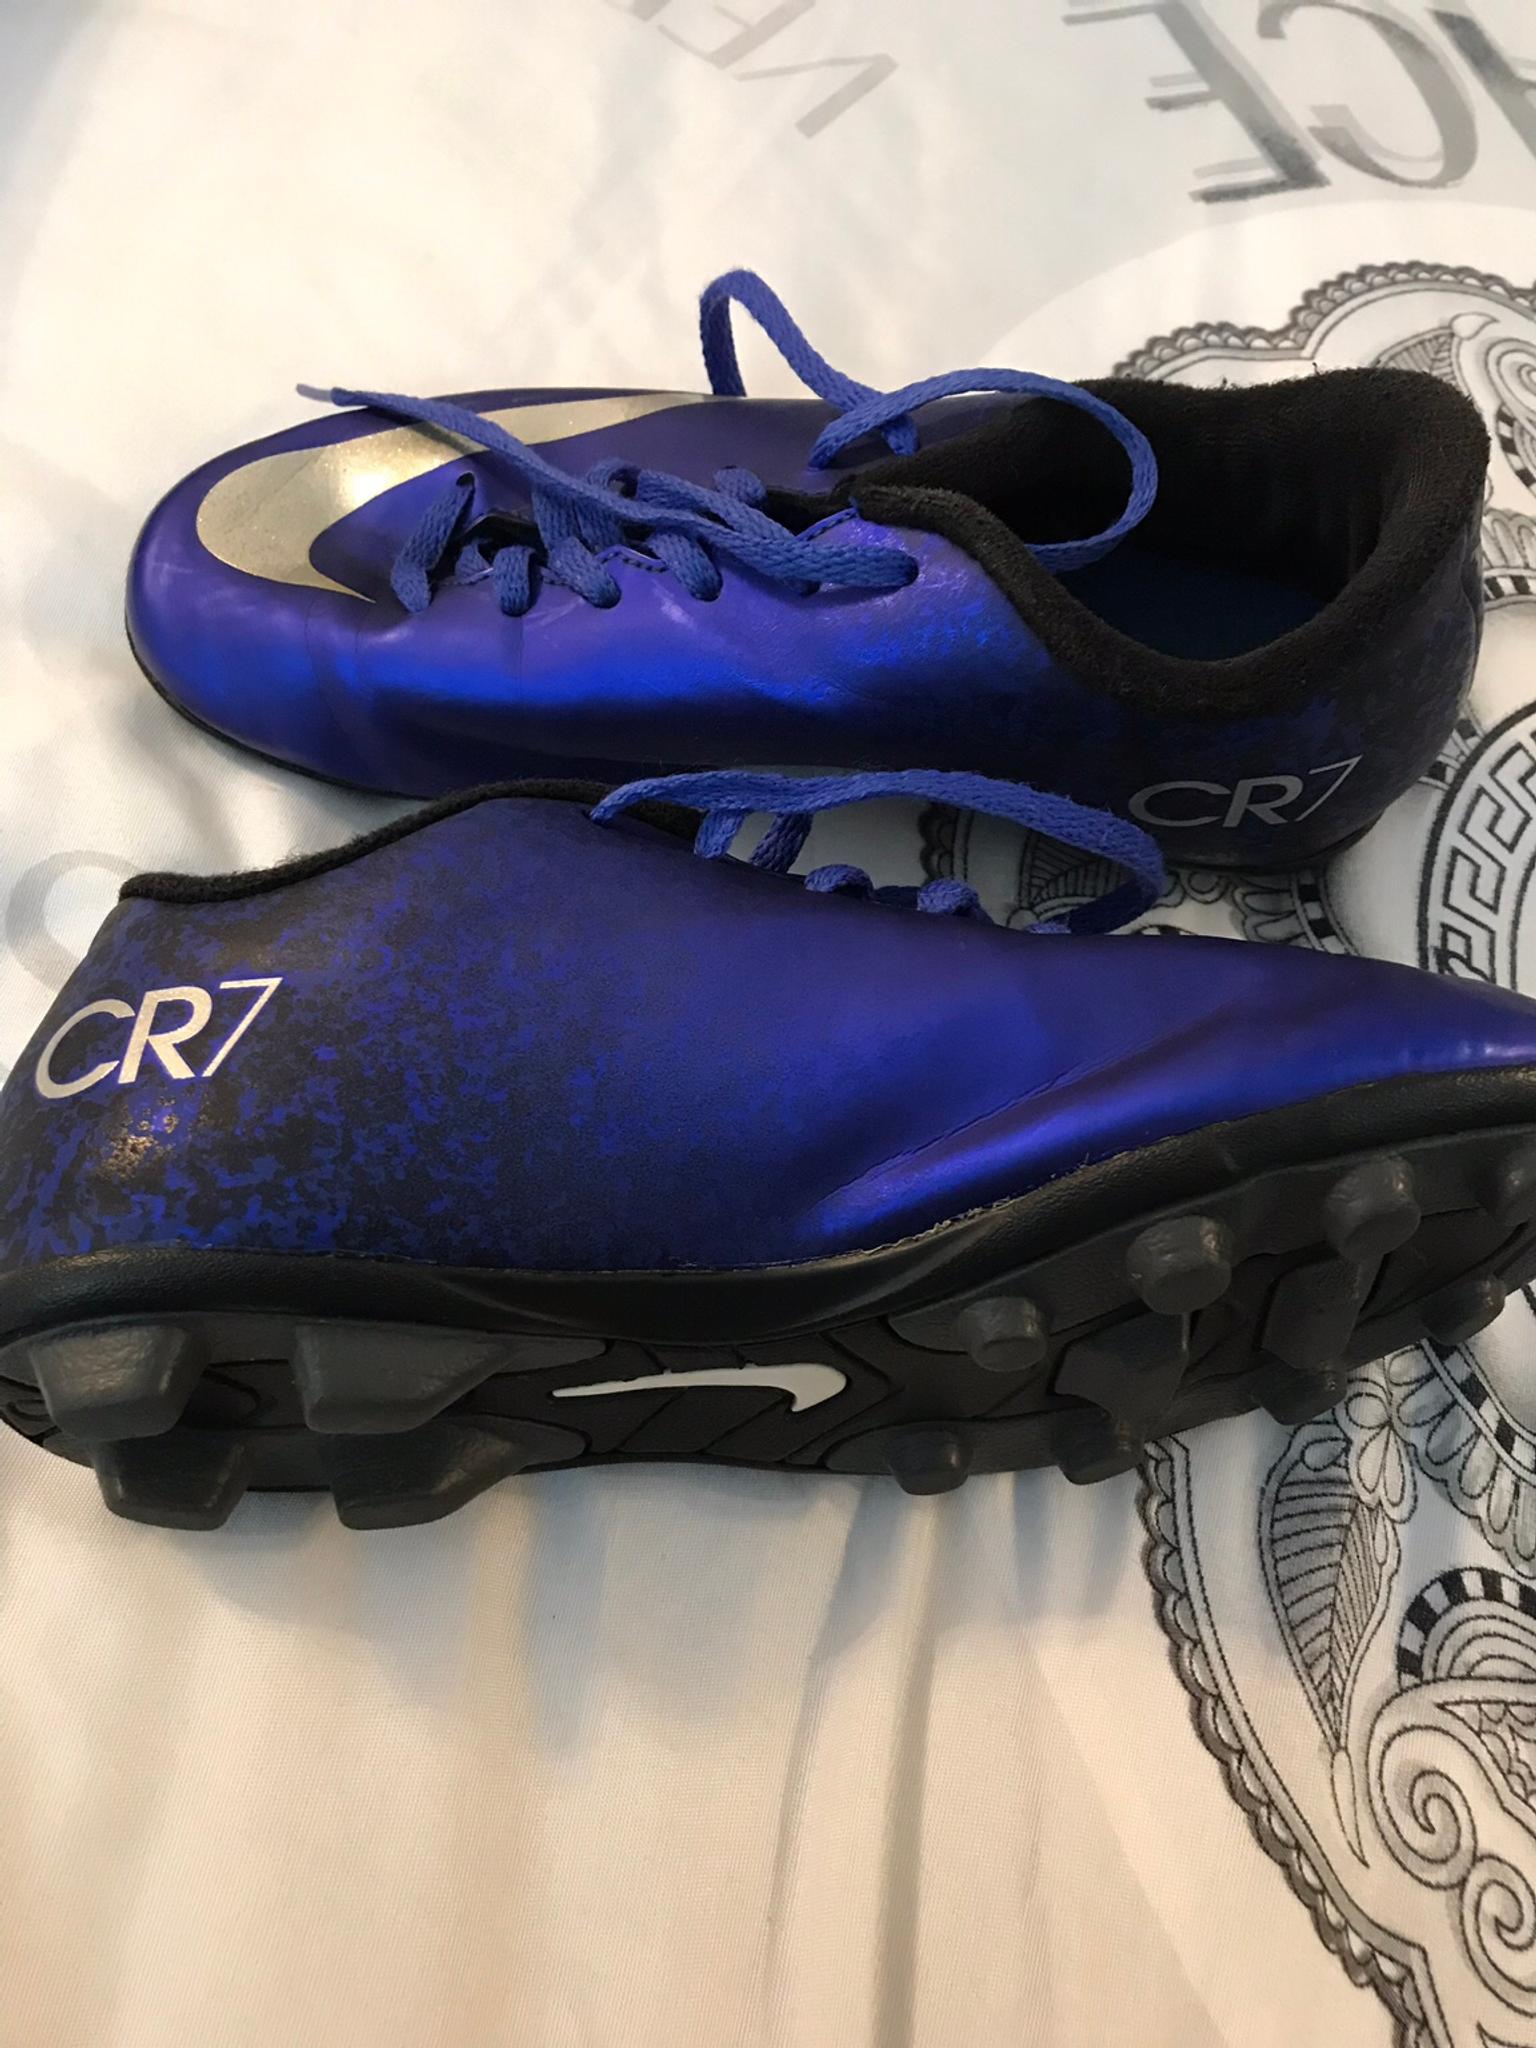 nike football boots size 2.5